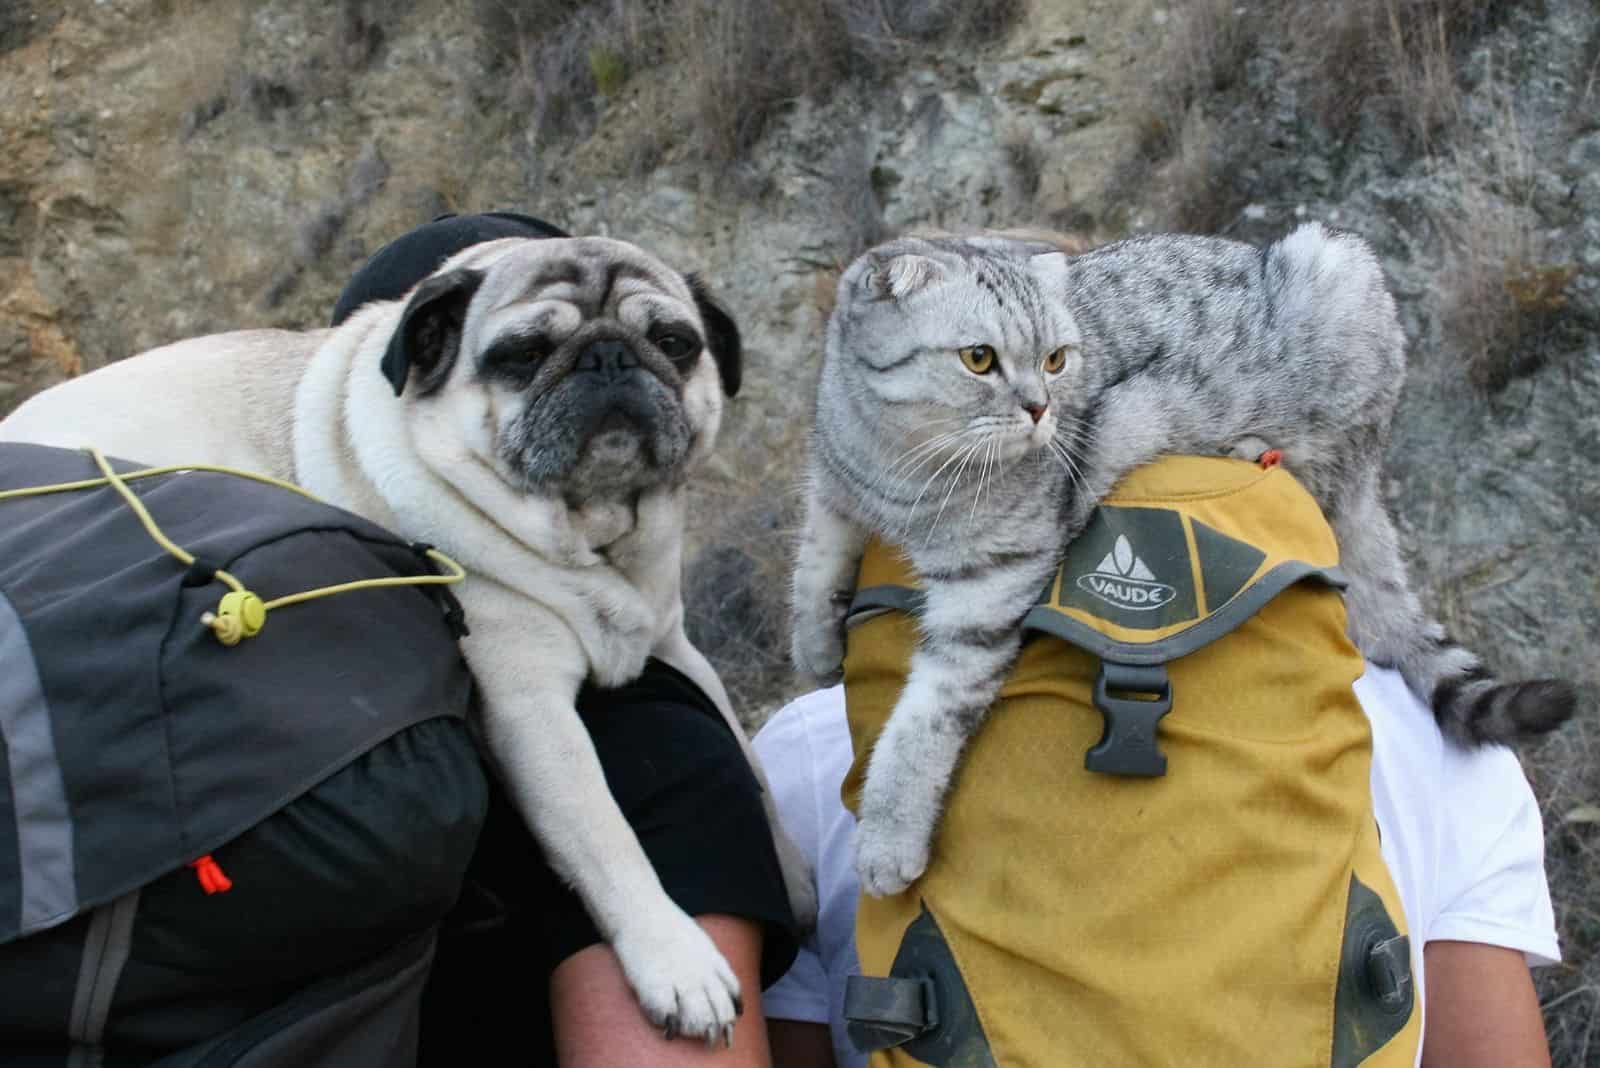 pug and cat on a backpack